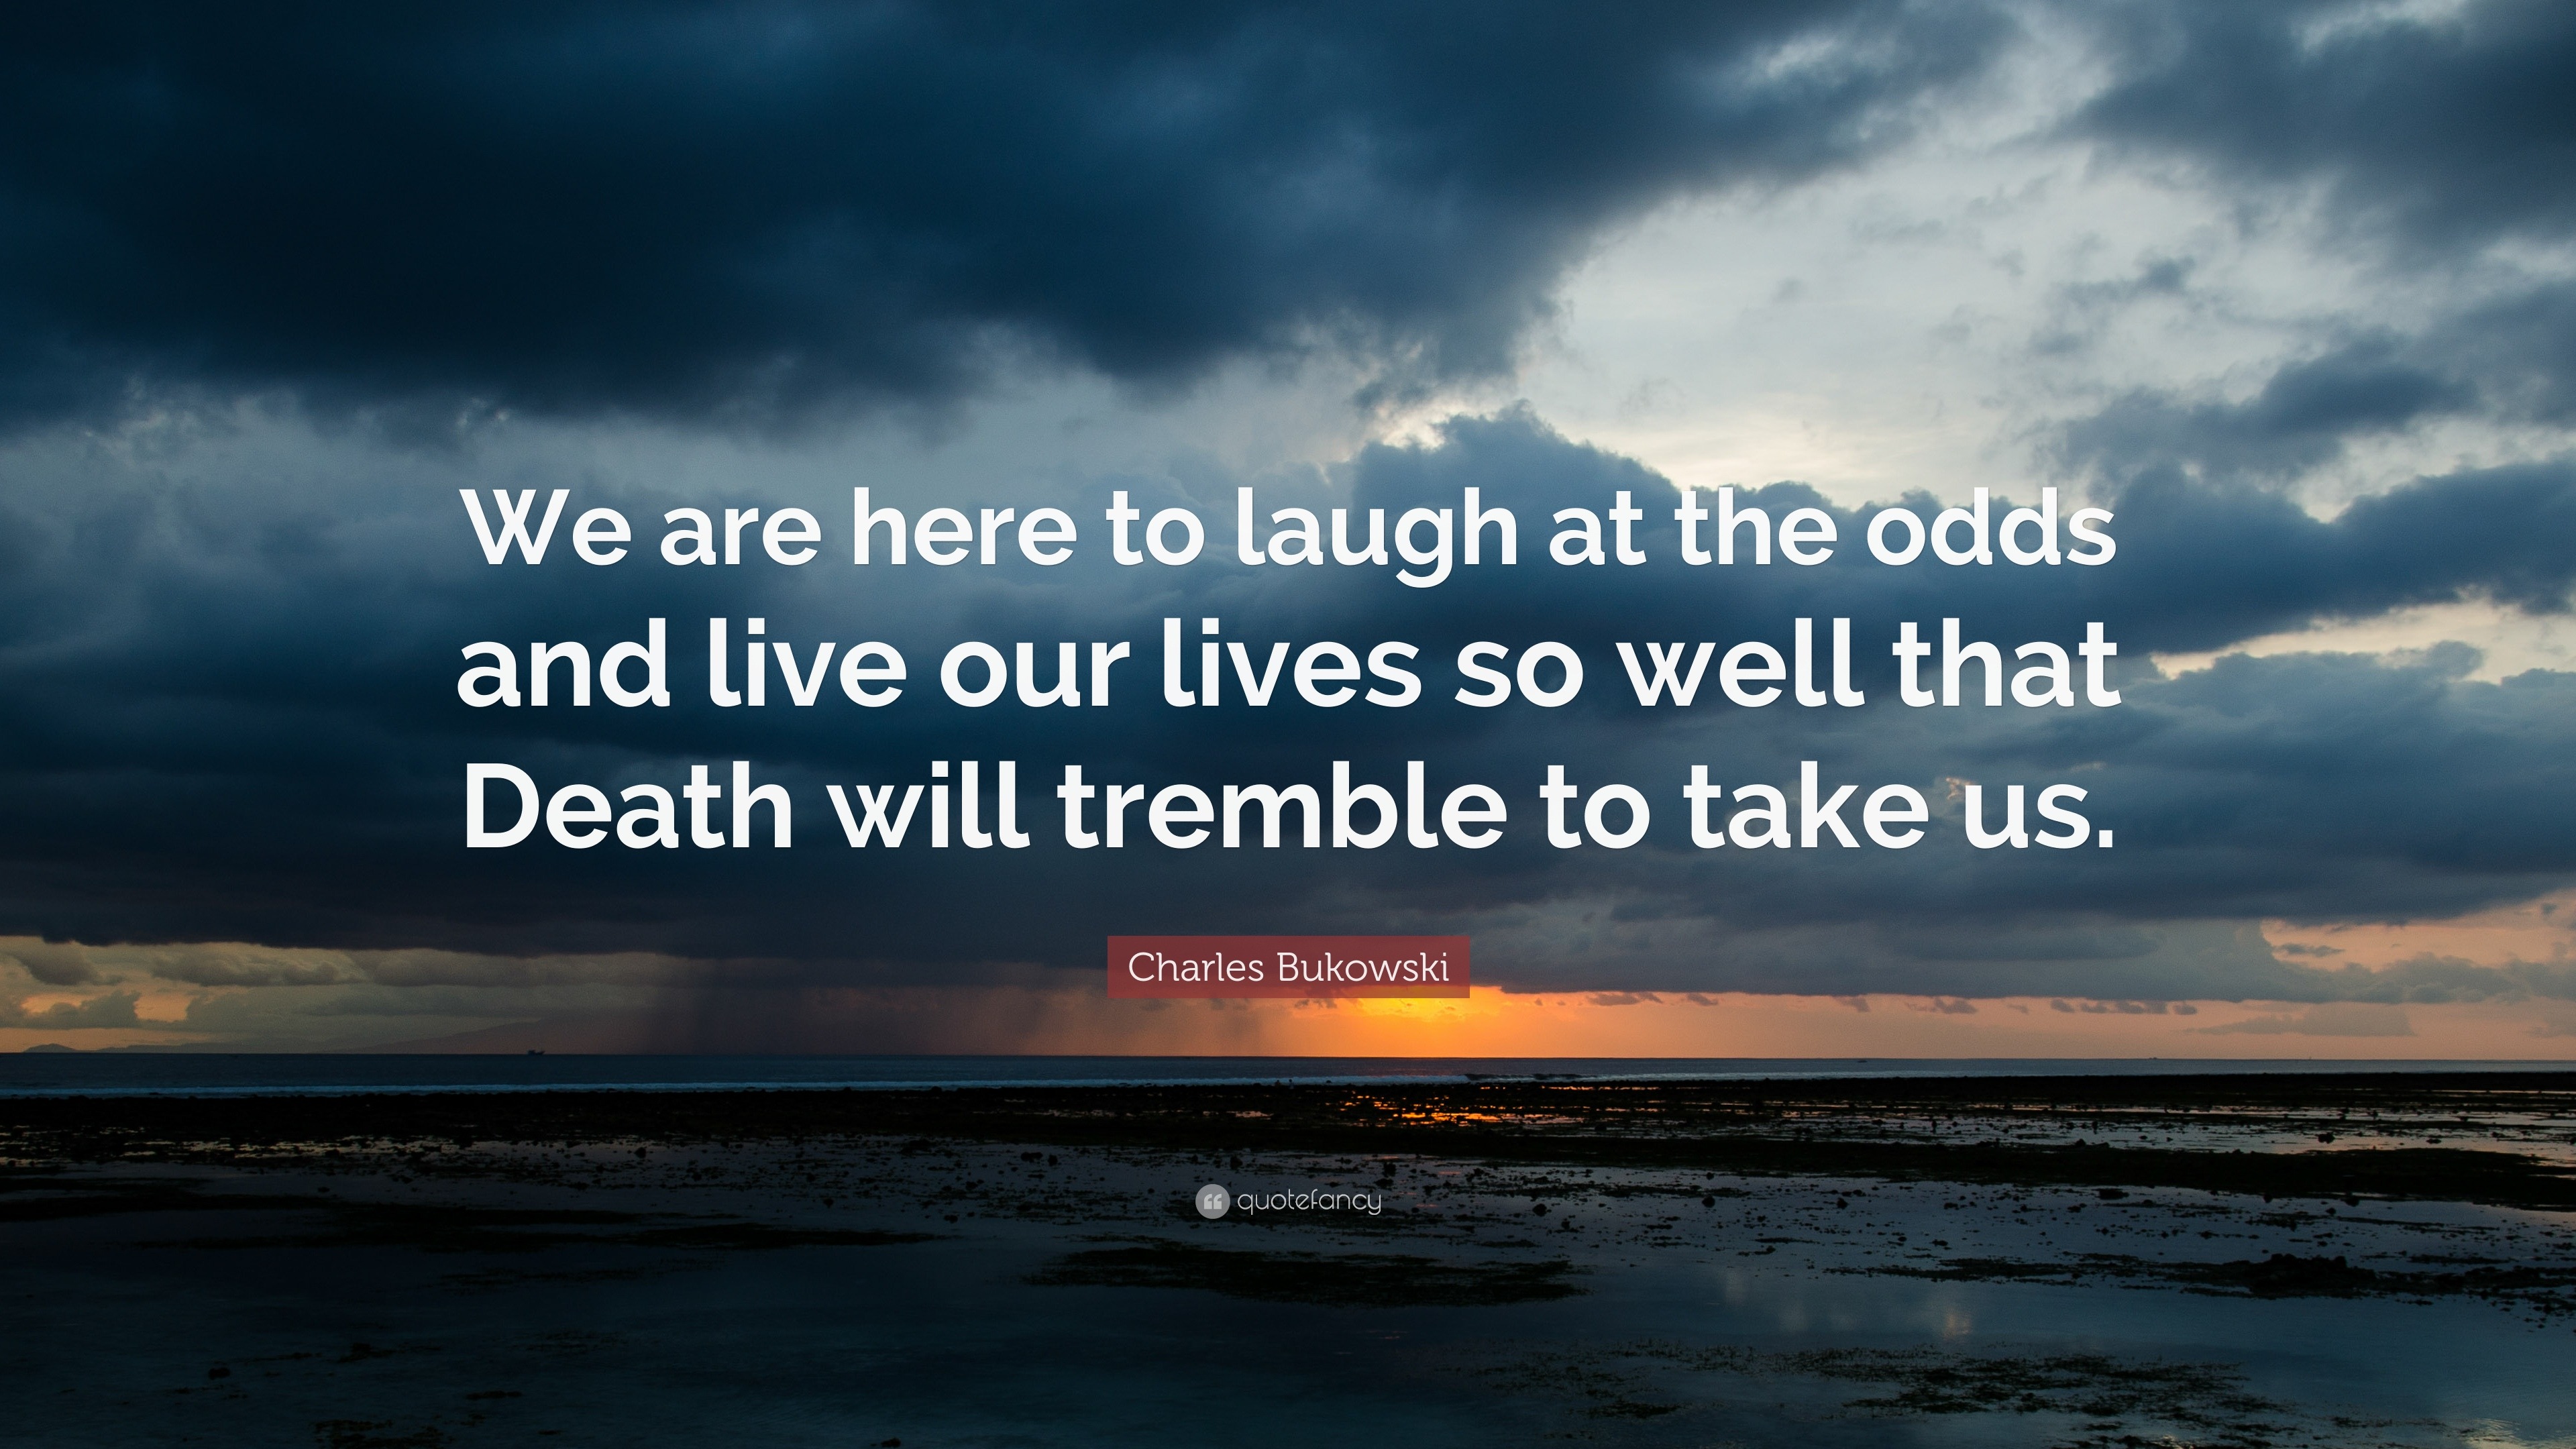 Top 40 Quotes About Laughing 21 Edition Free Images Quotefancy